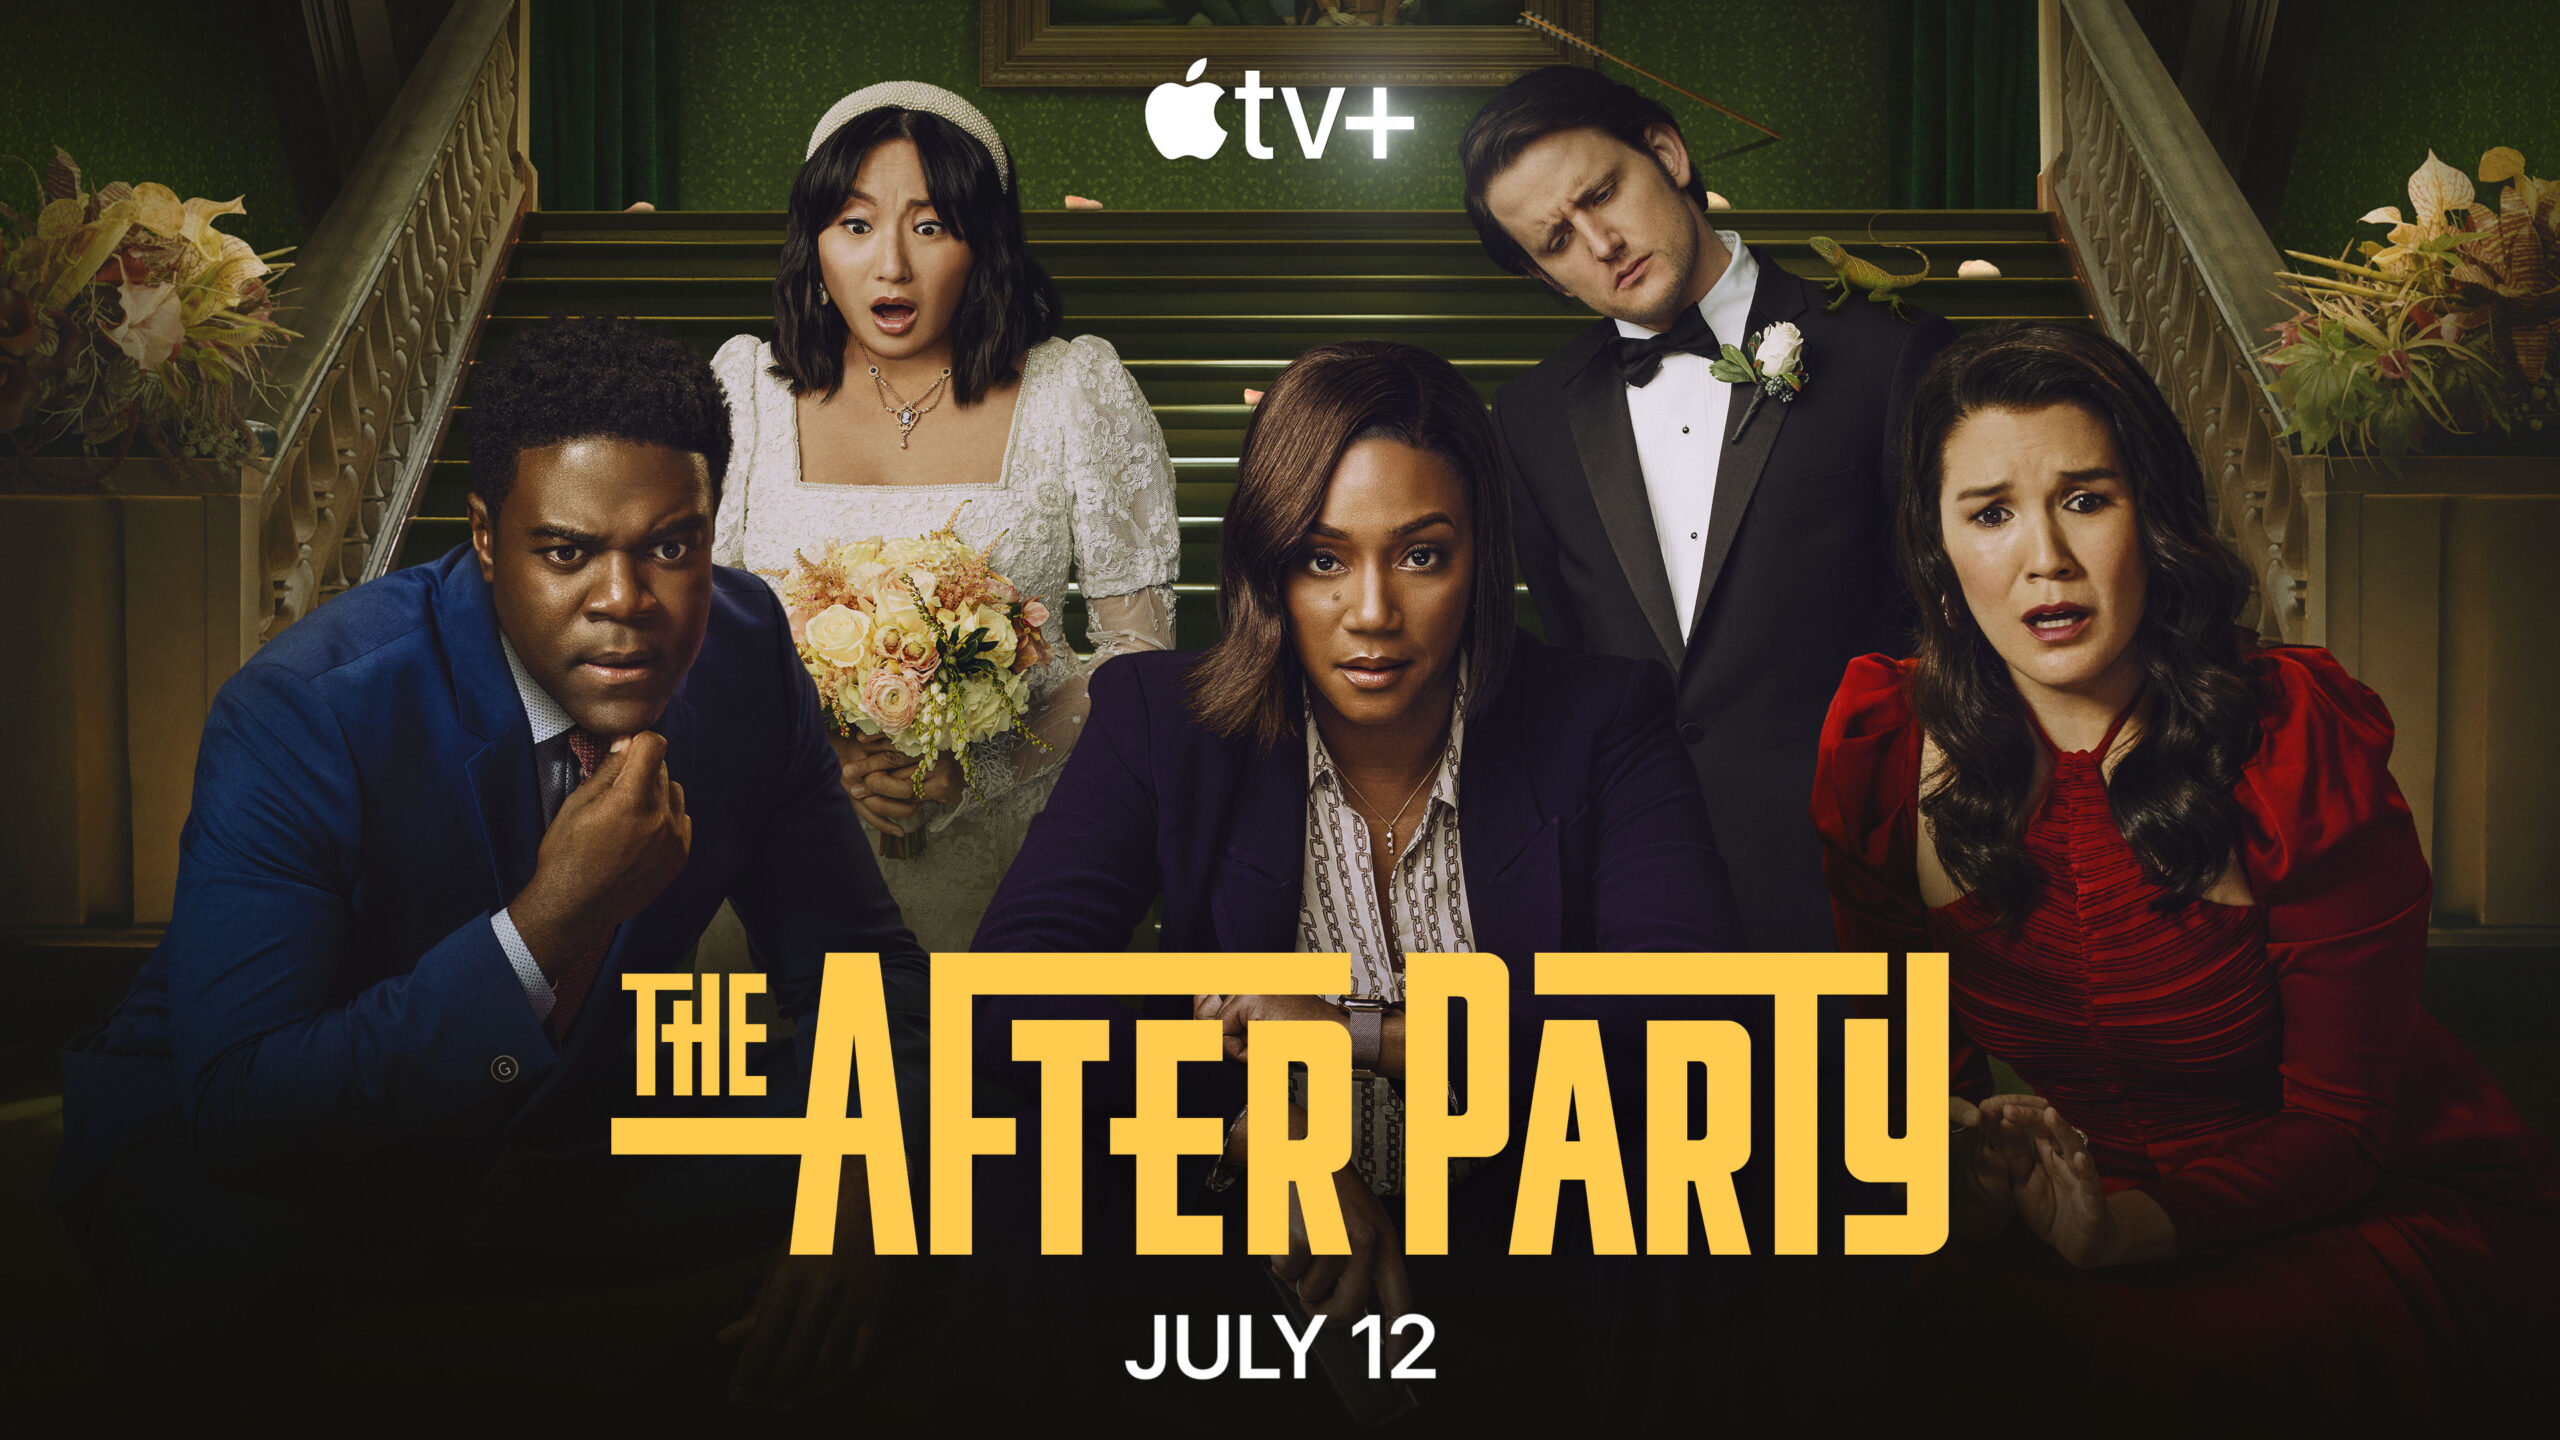 The Afterparty (stagione 2) - Poster orizzontale [credit: courtesy of Apple]